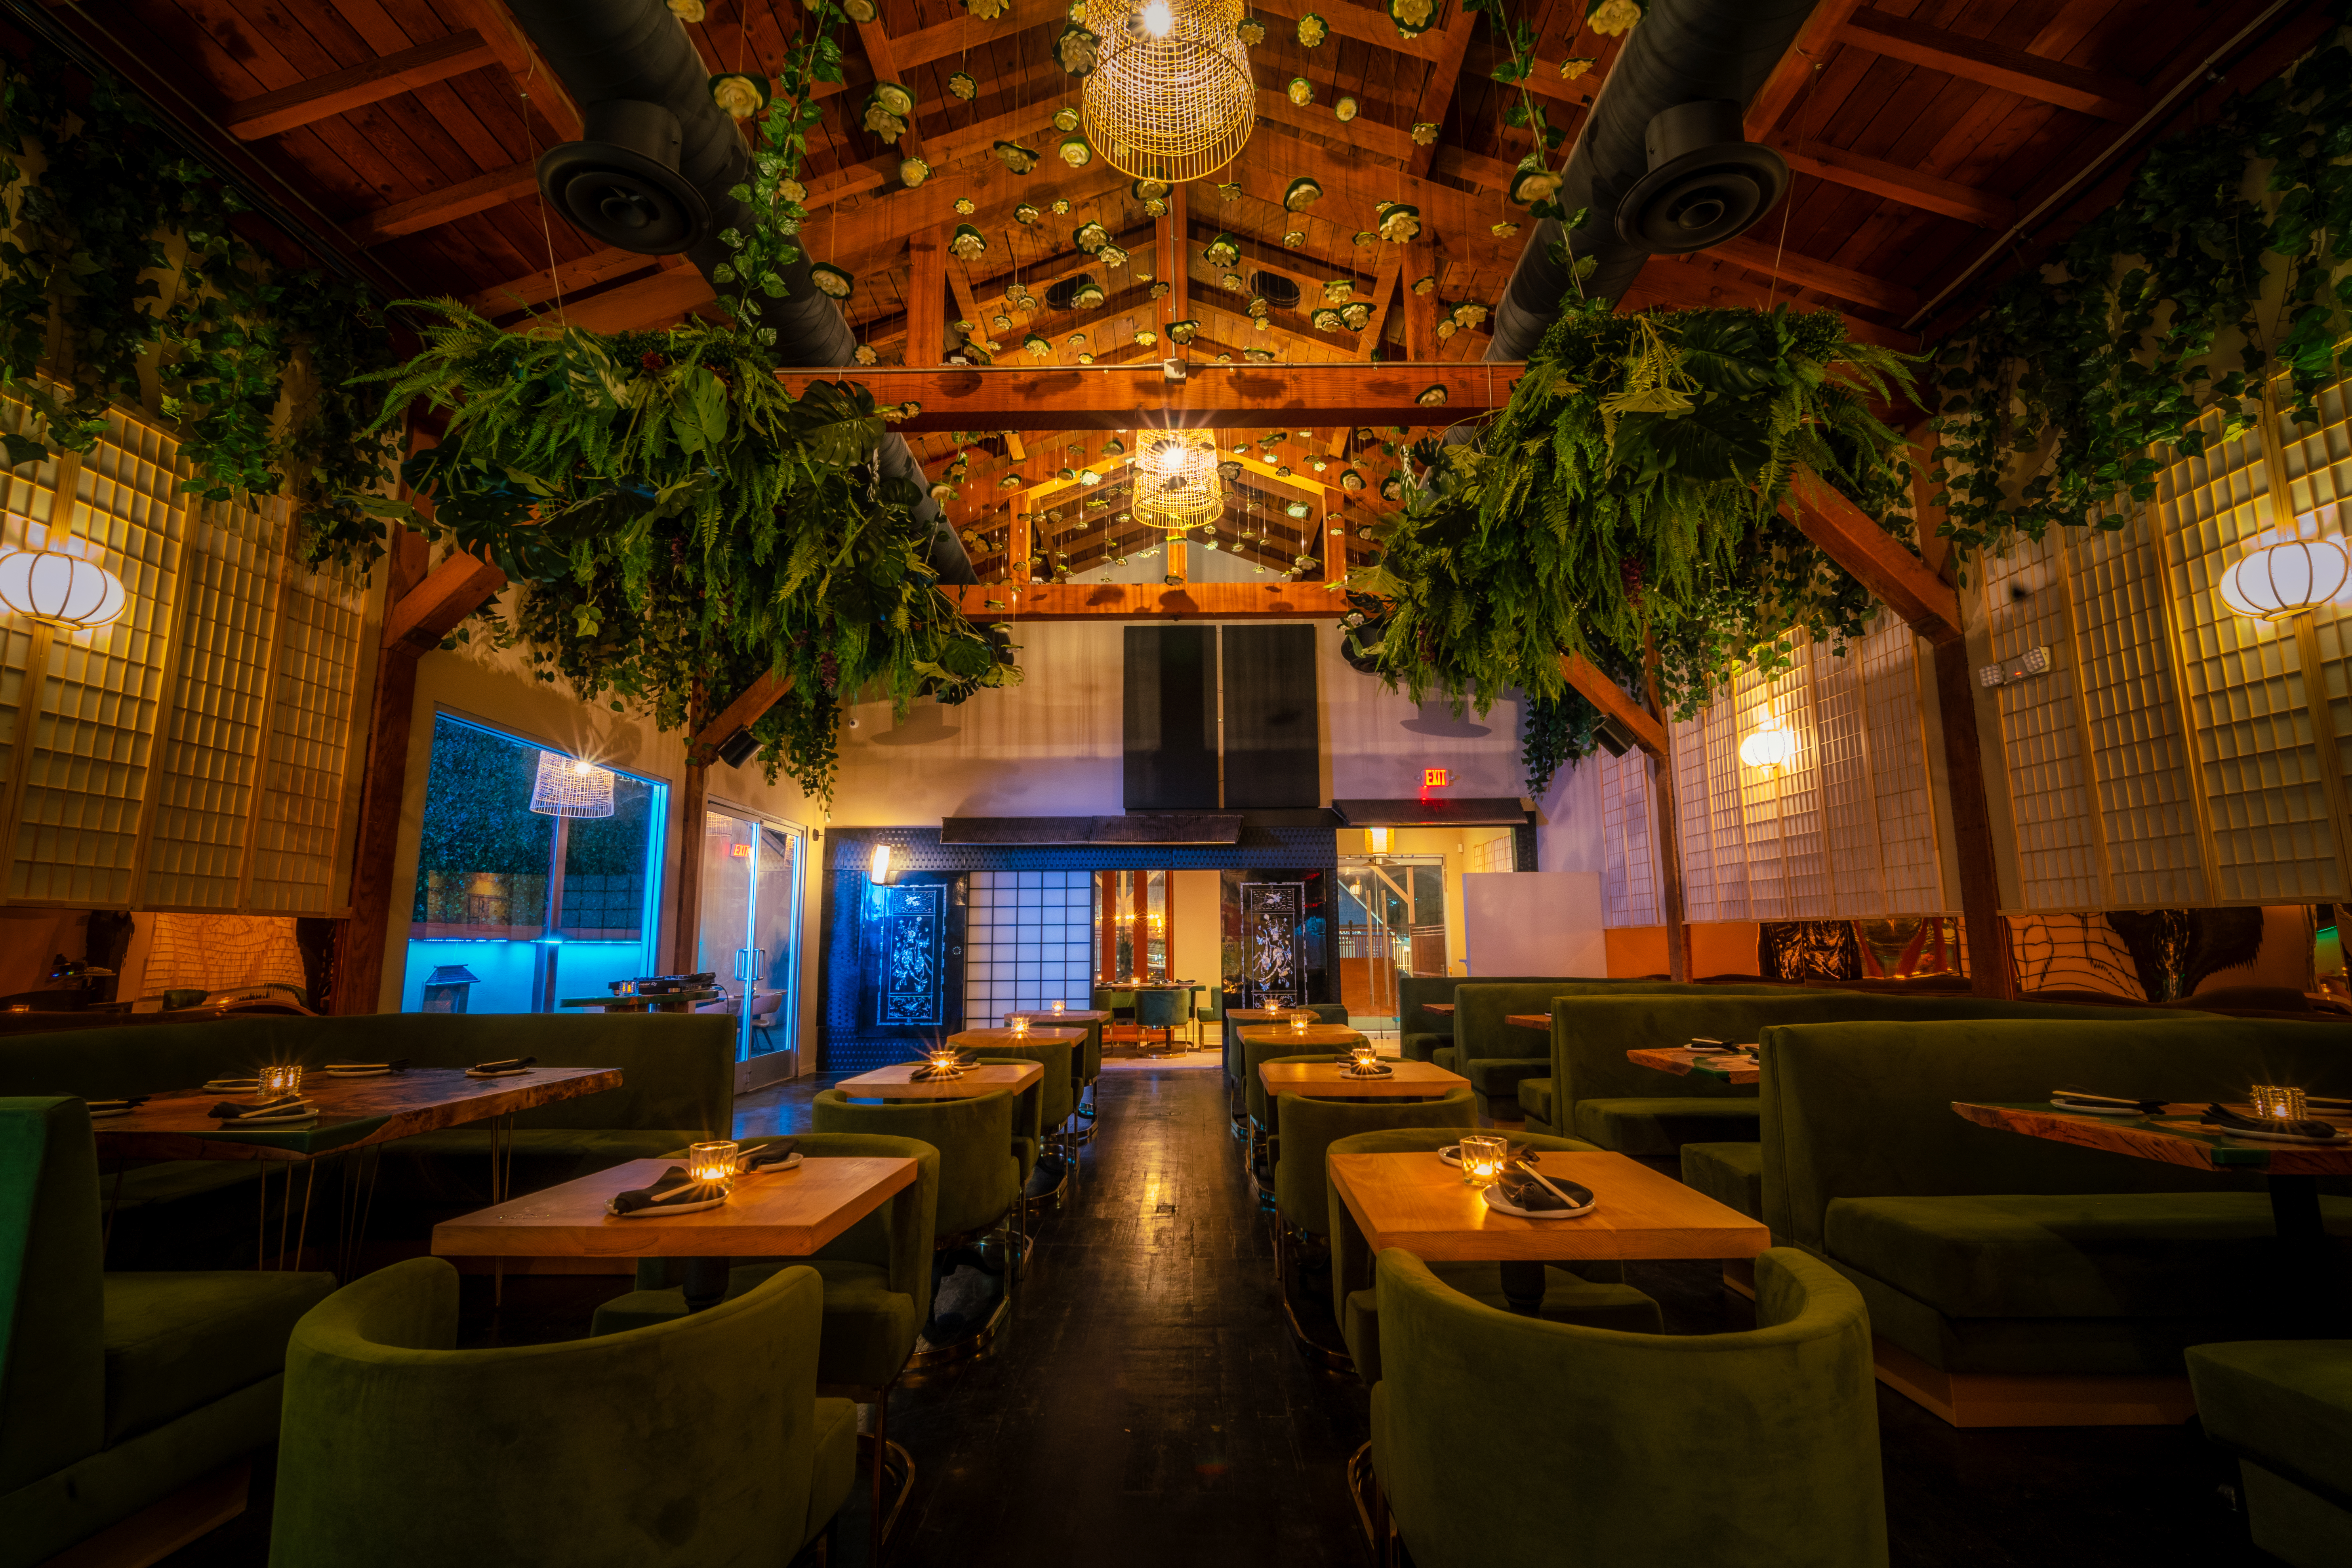 Onizuka West Hollywood with dim lights, hanging greenery, and dark green booths.